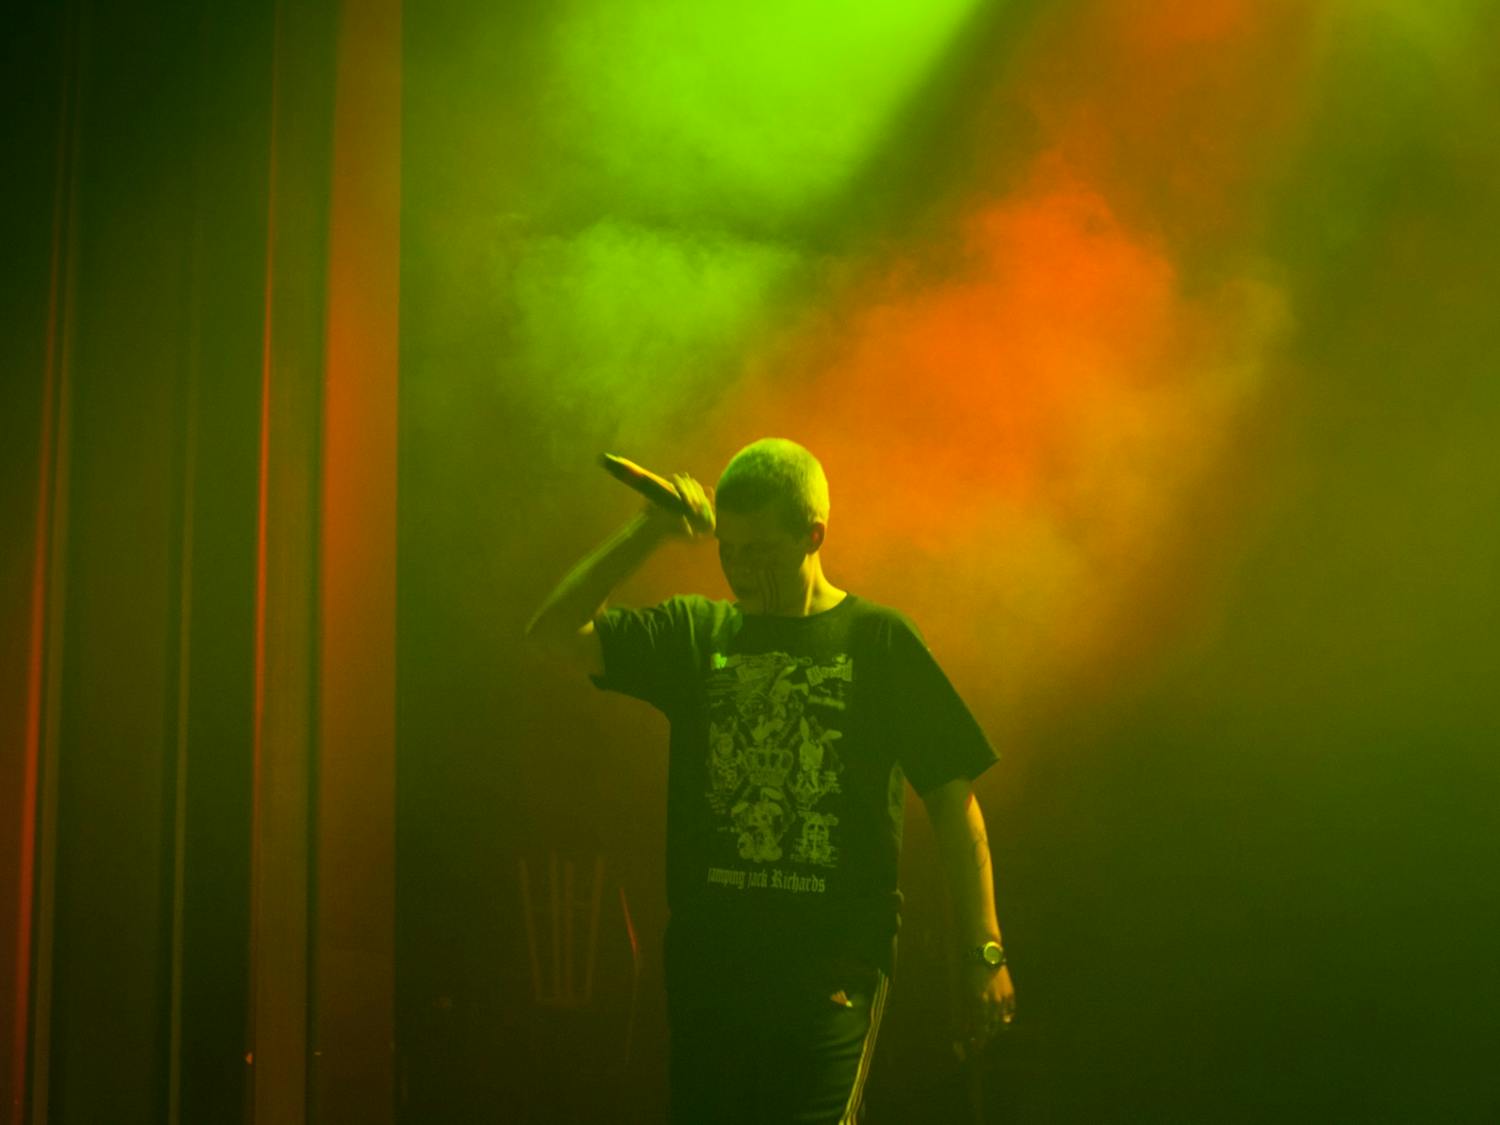 Swedish rapper Yung Lean performs at the Vogue Theatre in March 2016.